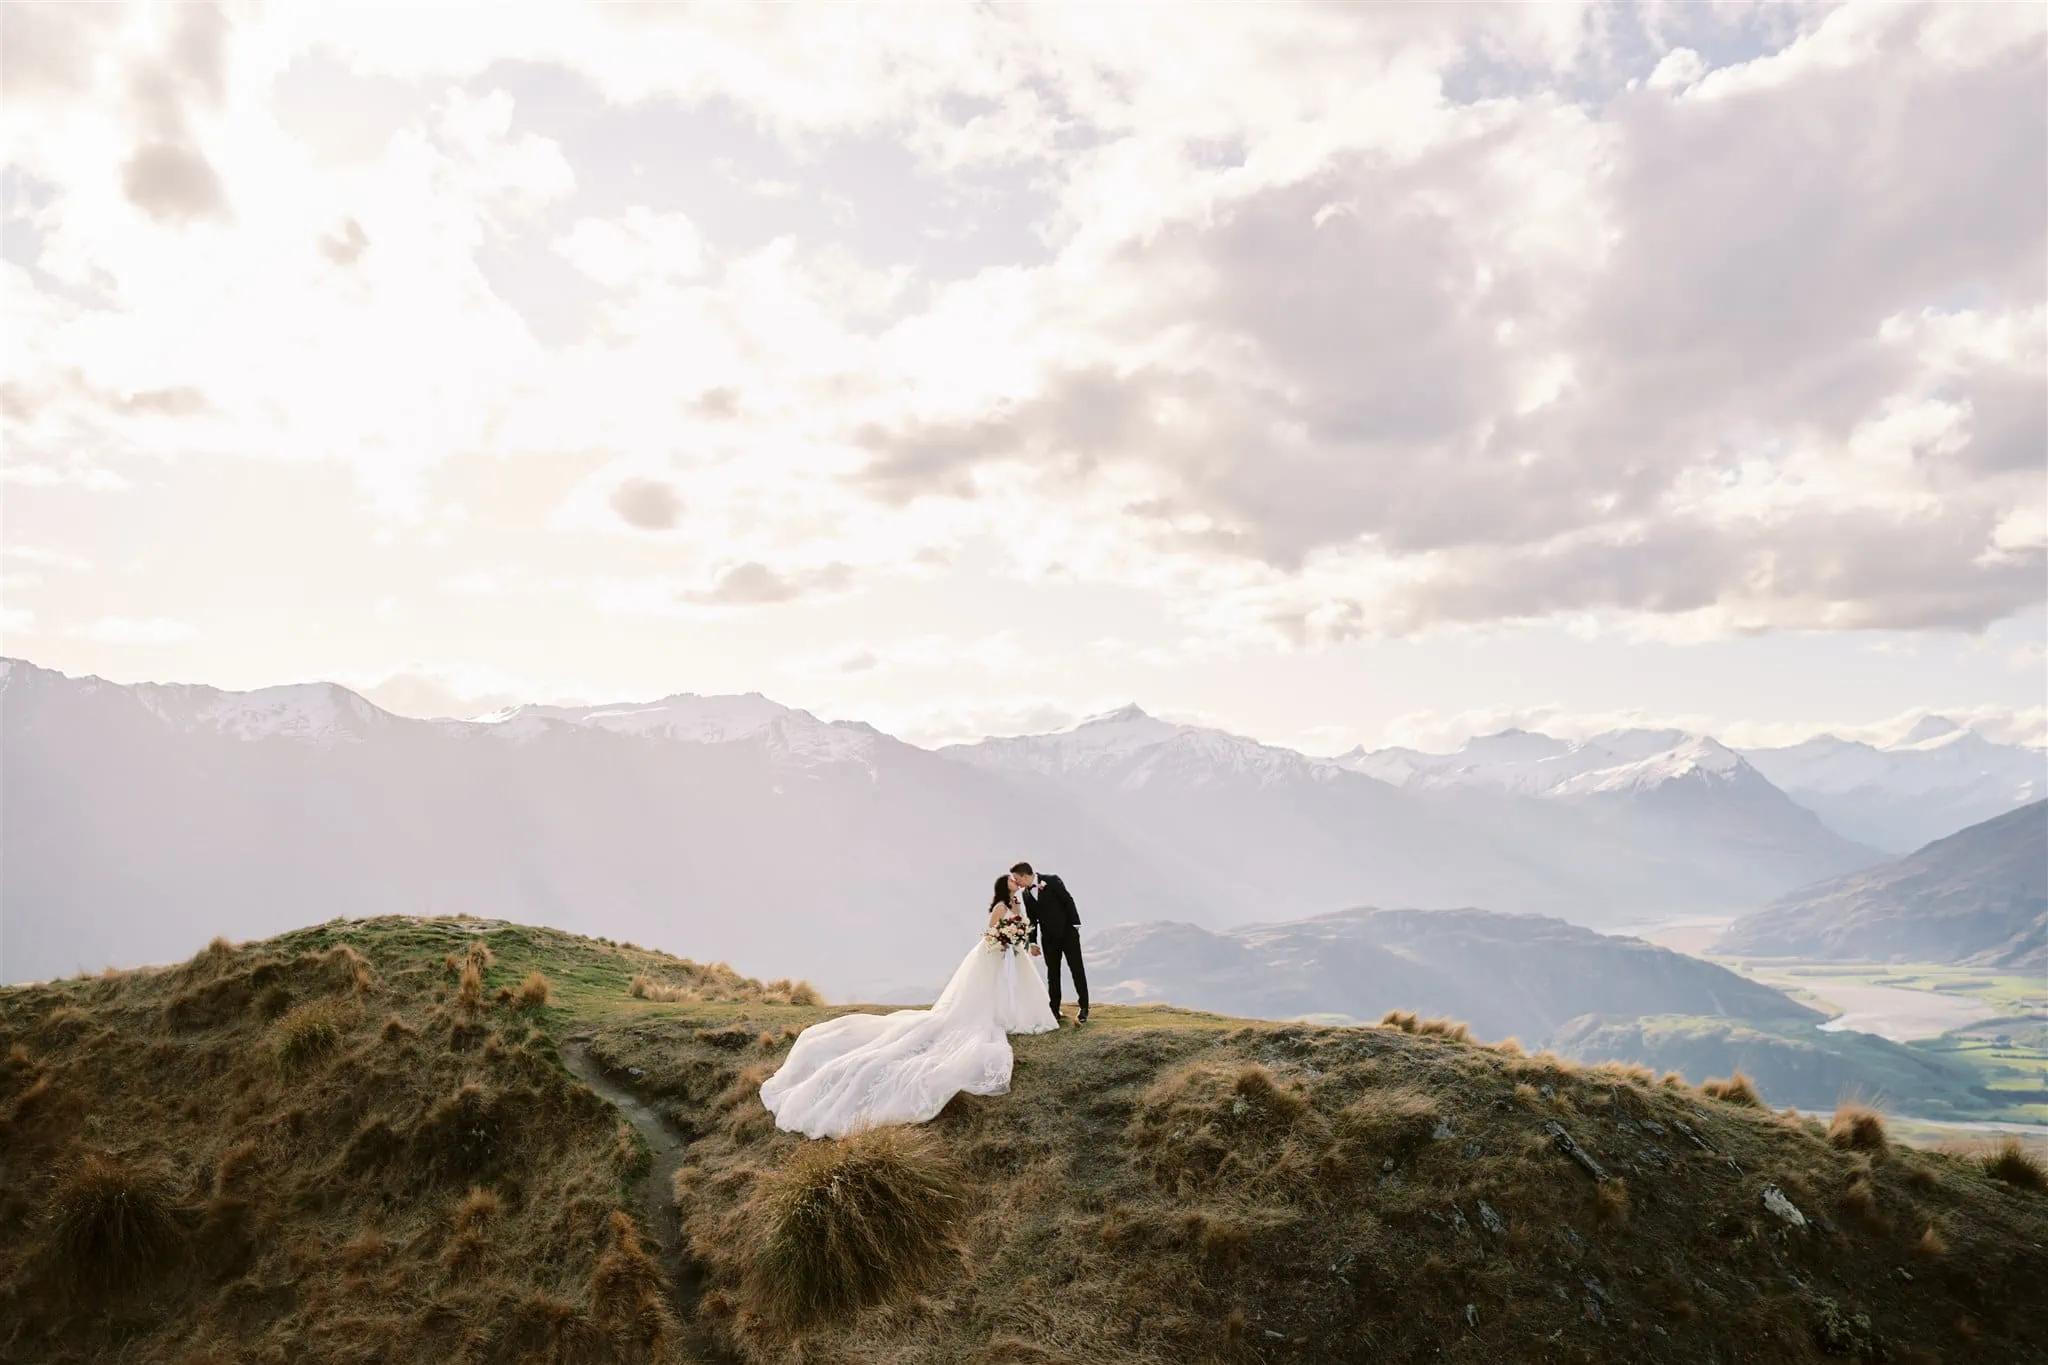 Queenstown Elopement Heli Wedding Photographer クイーンズタウン結婚式 | An elopement wedding couple in a wedding dress on a hill with mountains in the background.